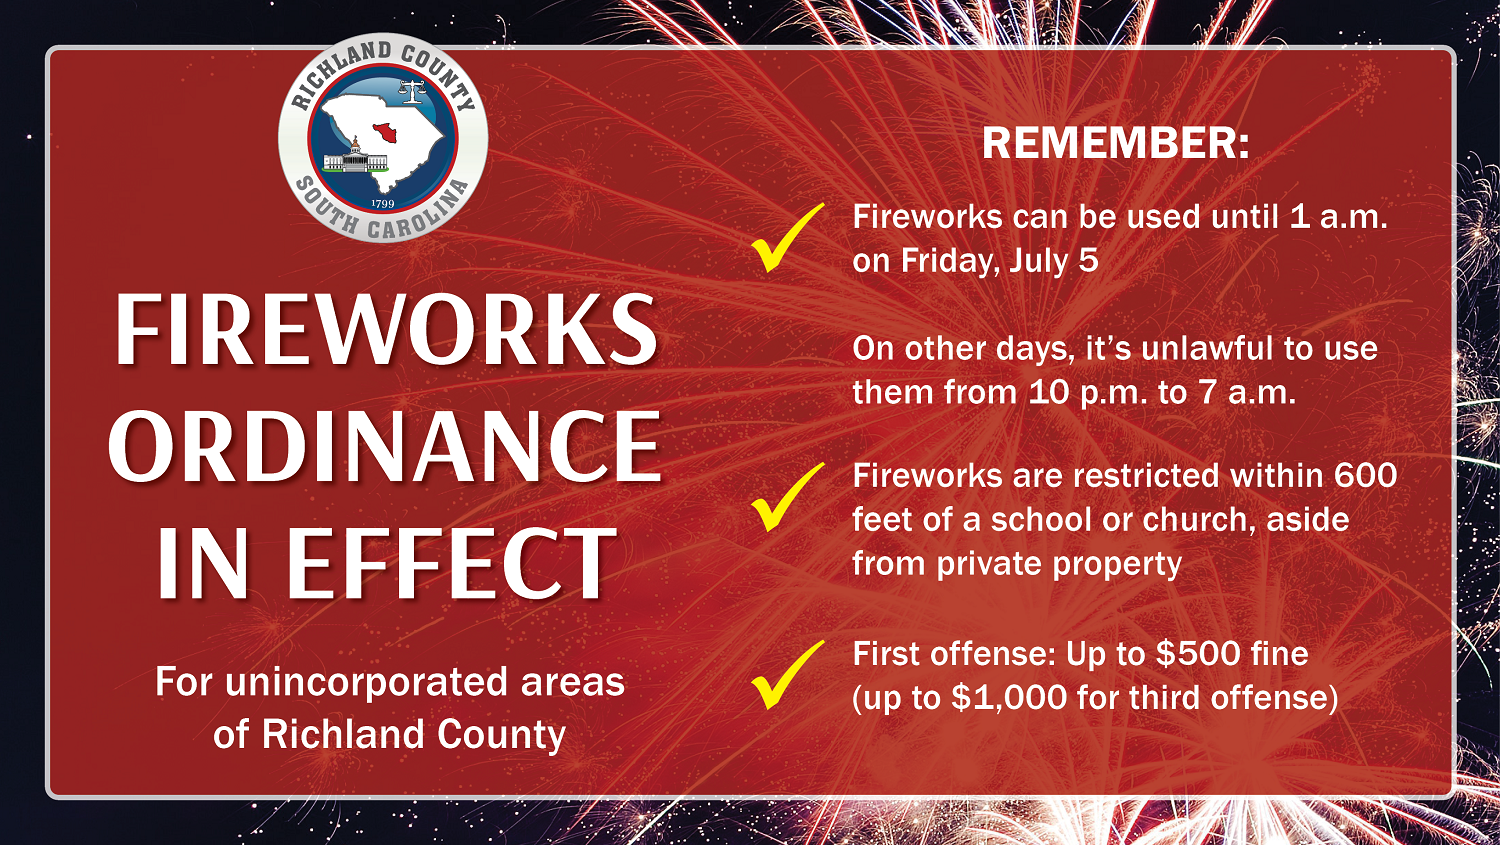 The County's fireworks ordinance is in effect